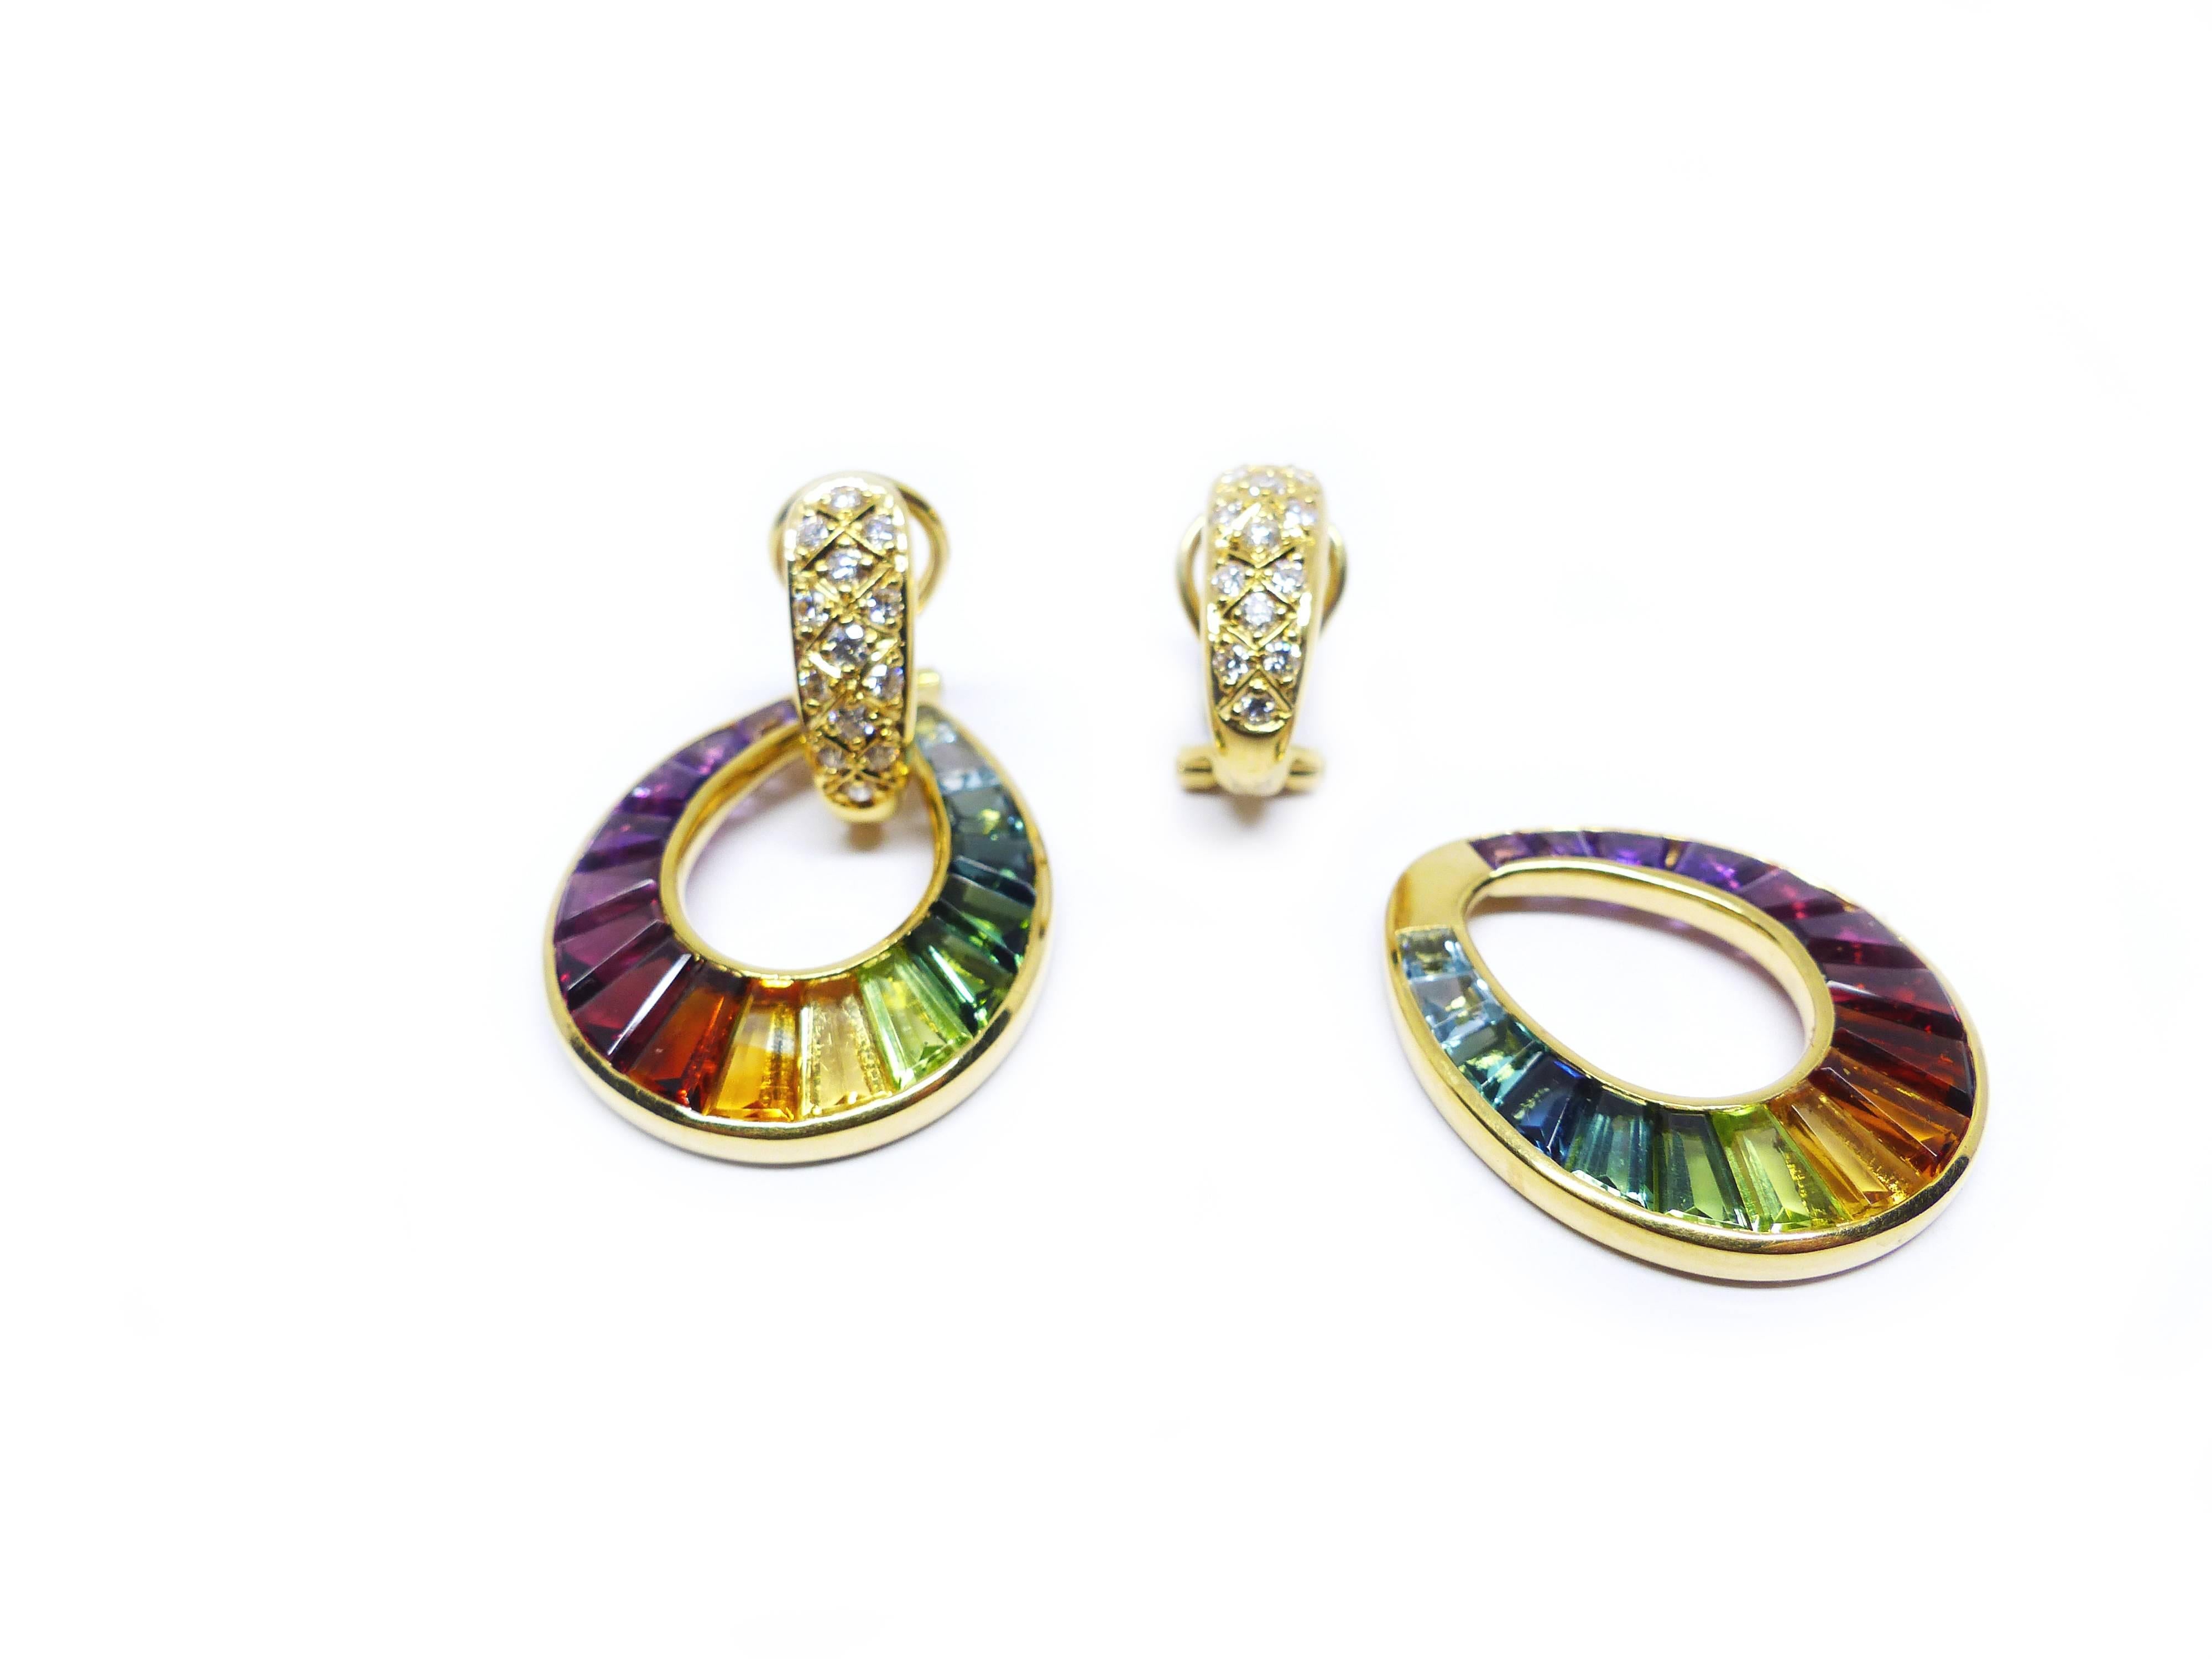 This 18k yellow gold pair of earrings with 34 different gemstones in top quality, tapez cut (8,59cts), set in the colours of a rainbow. Clips at the back.

18k Yellow Gold (14.77g)
Rainbow Multi-Colour Gemstones (34x tapez cut - 8.59ct)
Diamonds